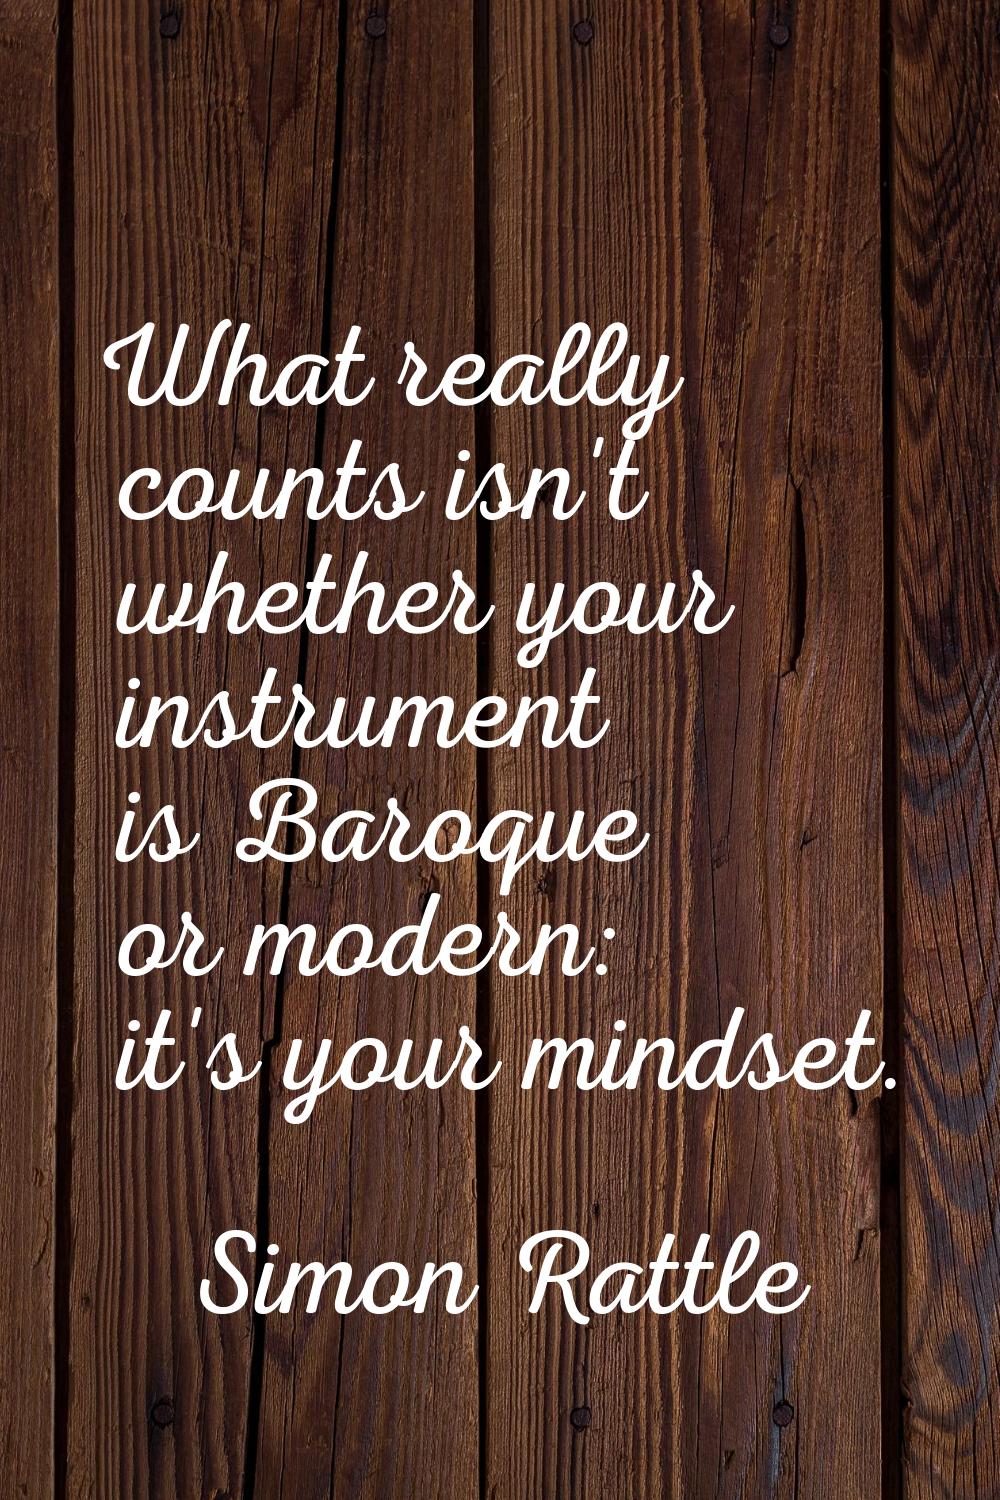 What really counts isn't whether your instrument is Baroque or modern: it's your mindset.